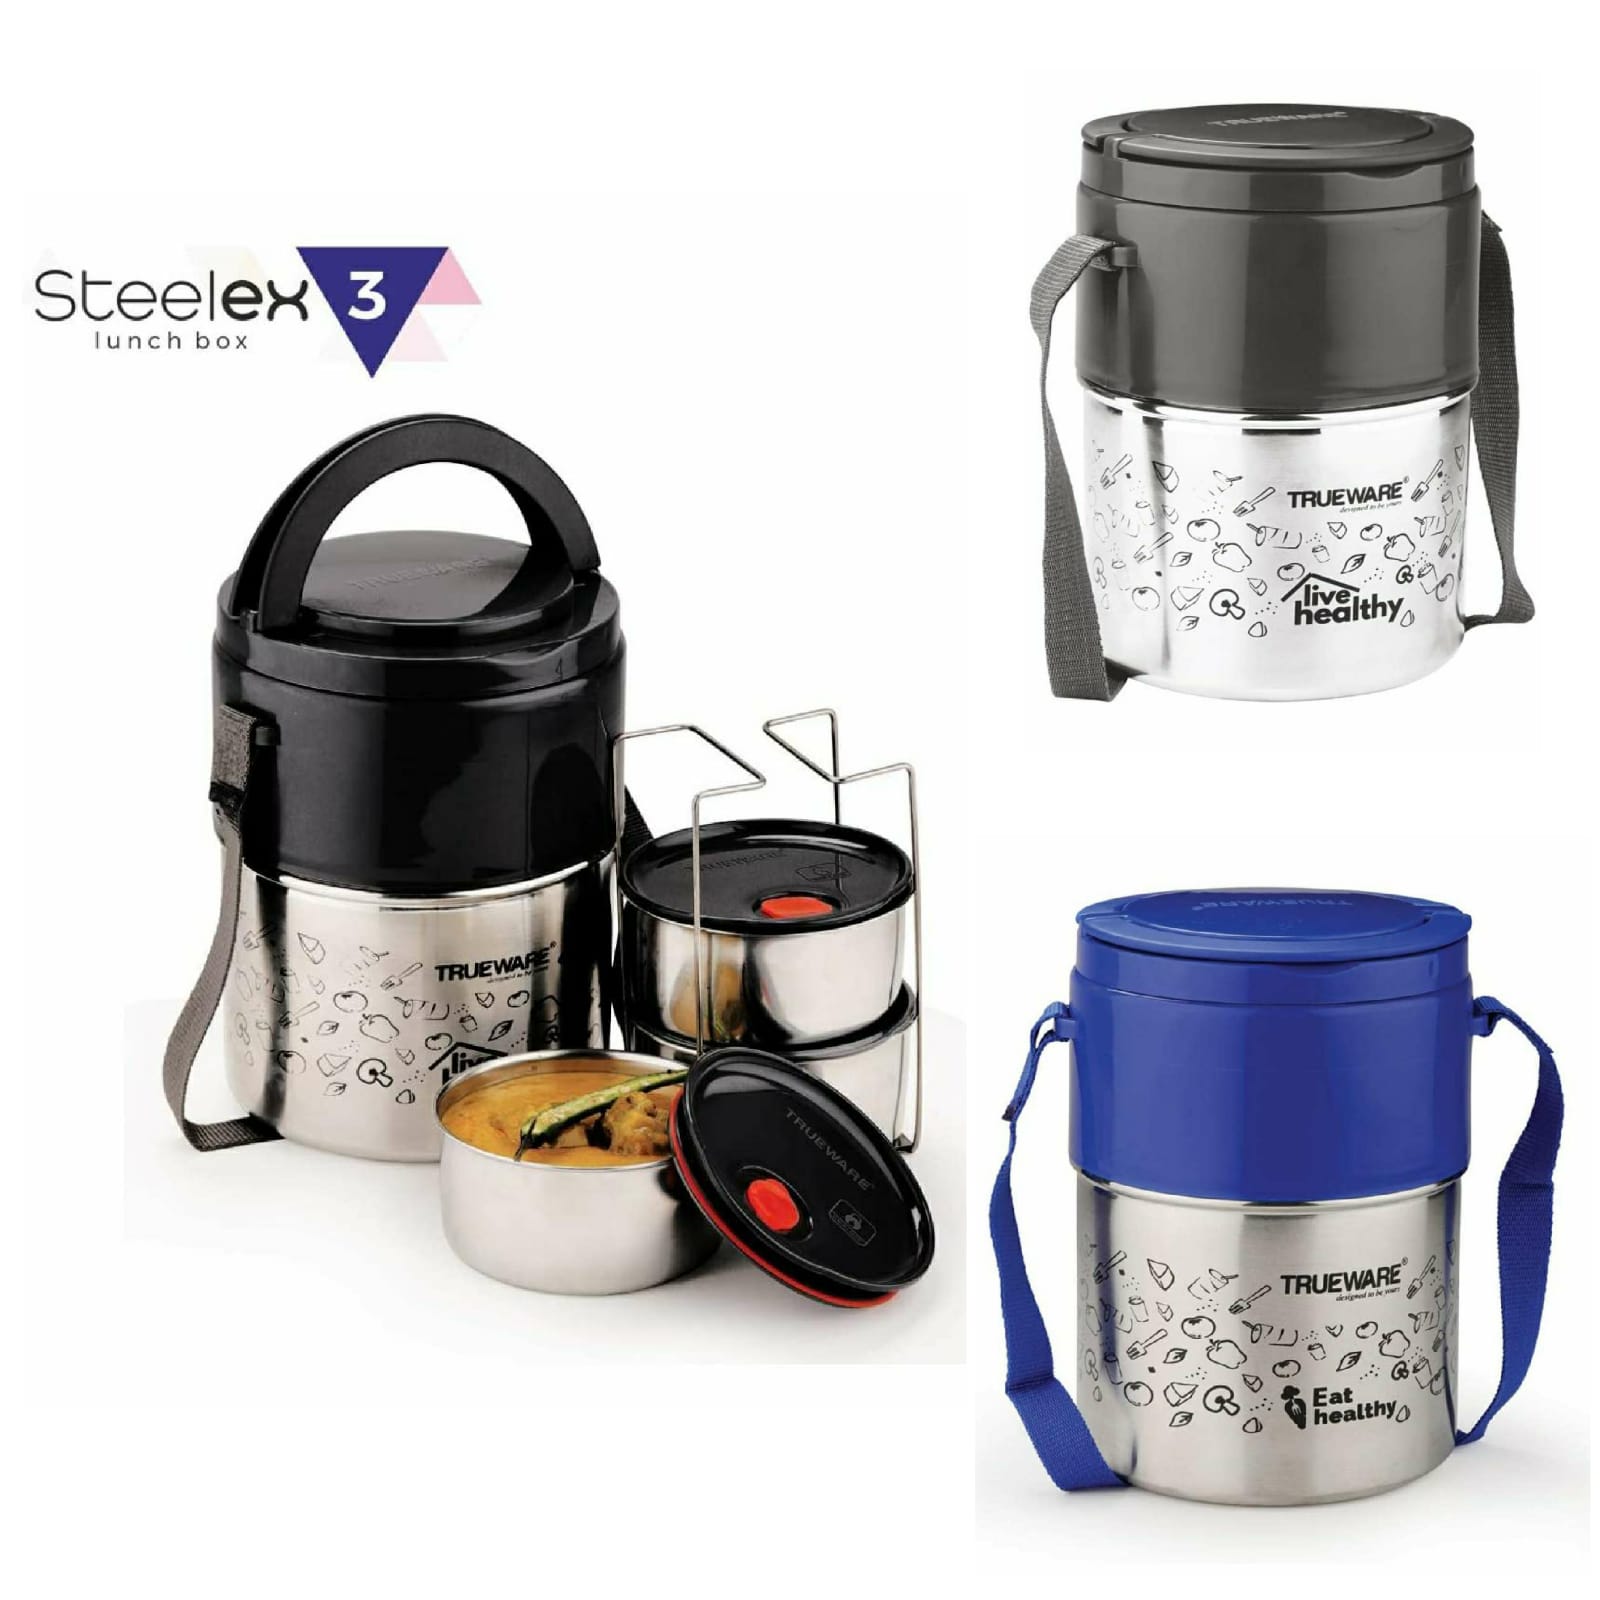 Trueware Steelex 3 Lunch Box, Stainless Steel each 350ml 3Container, Insulated Lunch Carrier, 1piece